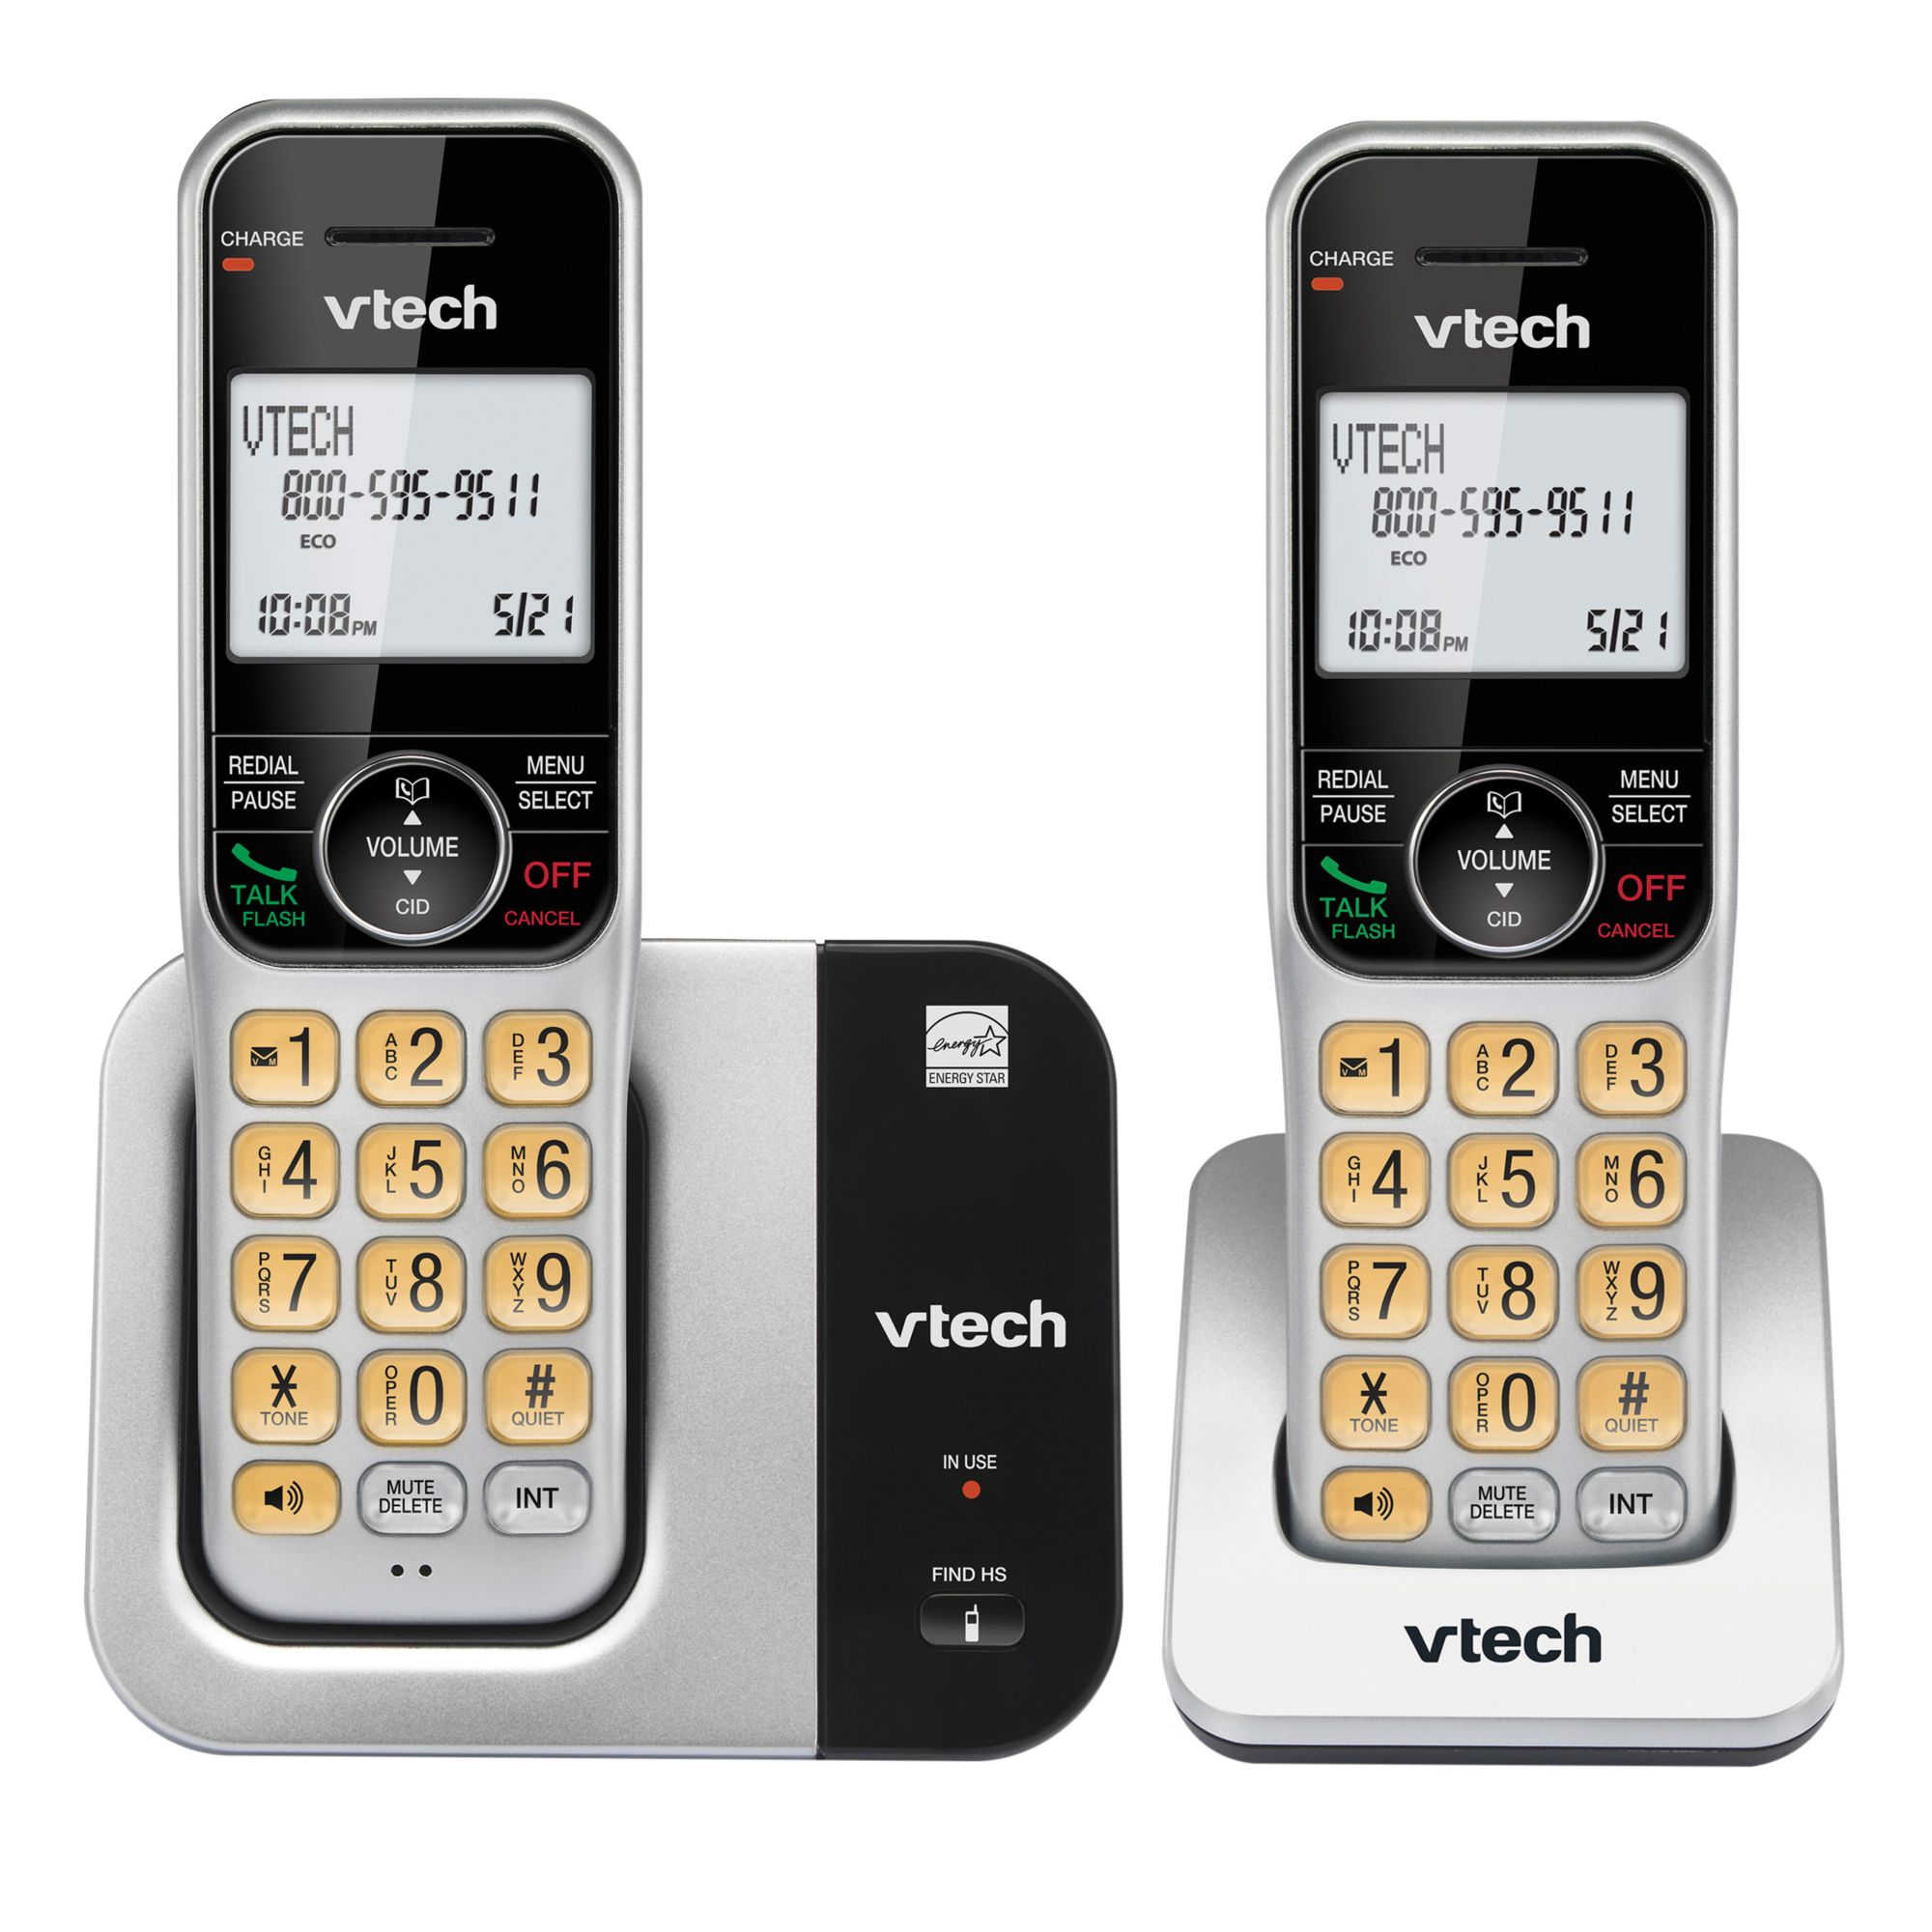 VTech 4-piece Cordless Handset System with Connect to Cell